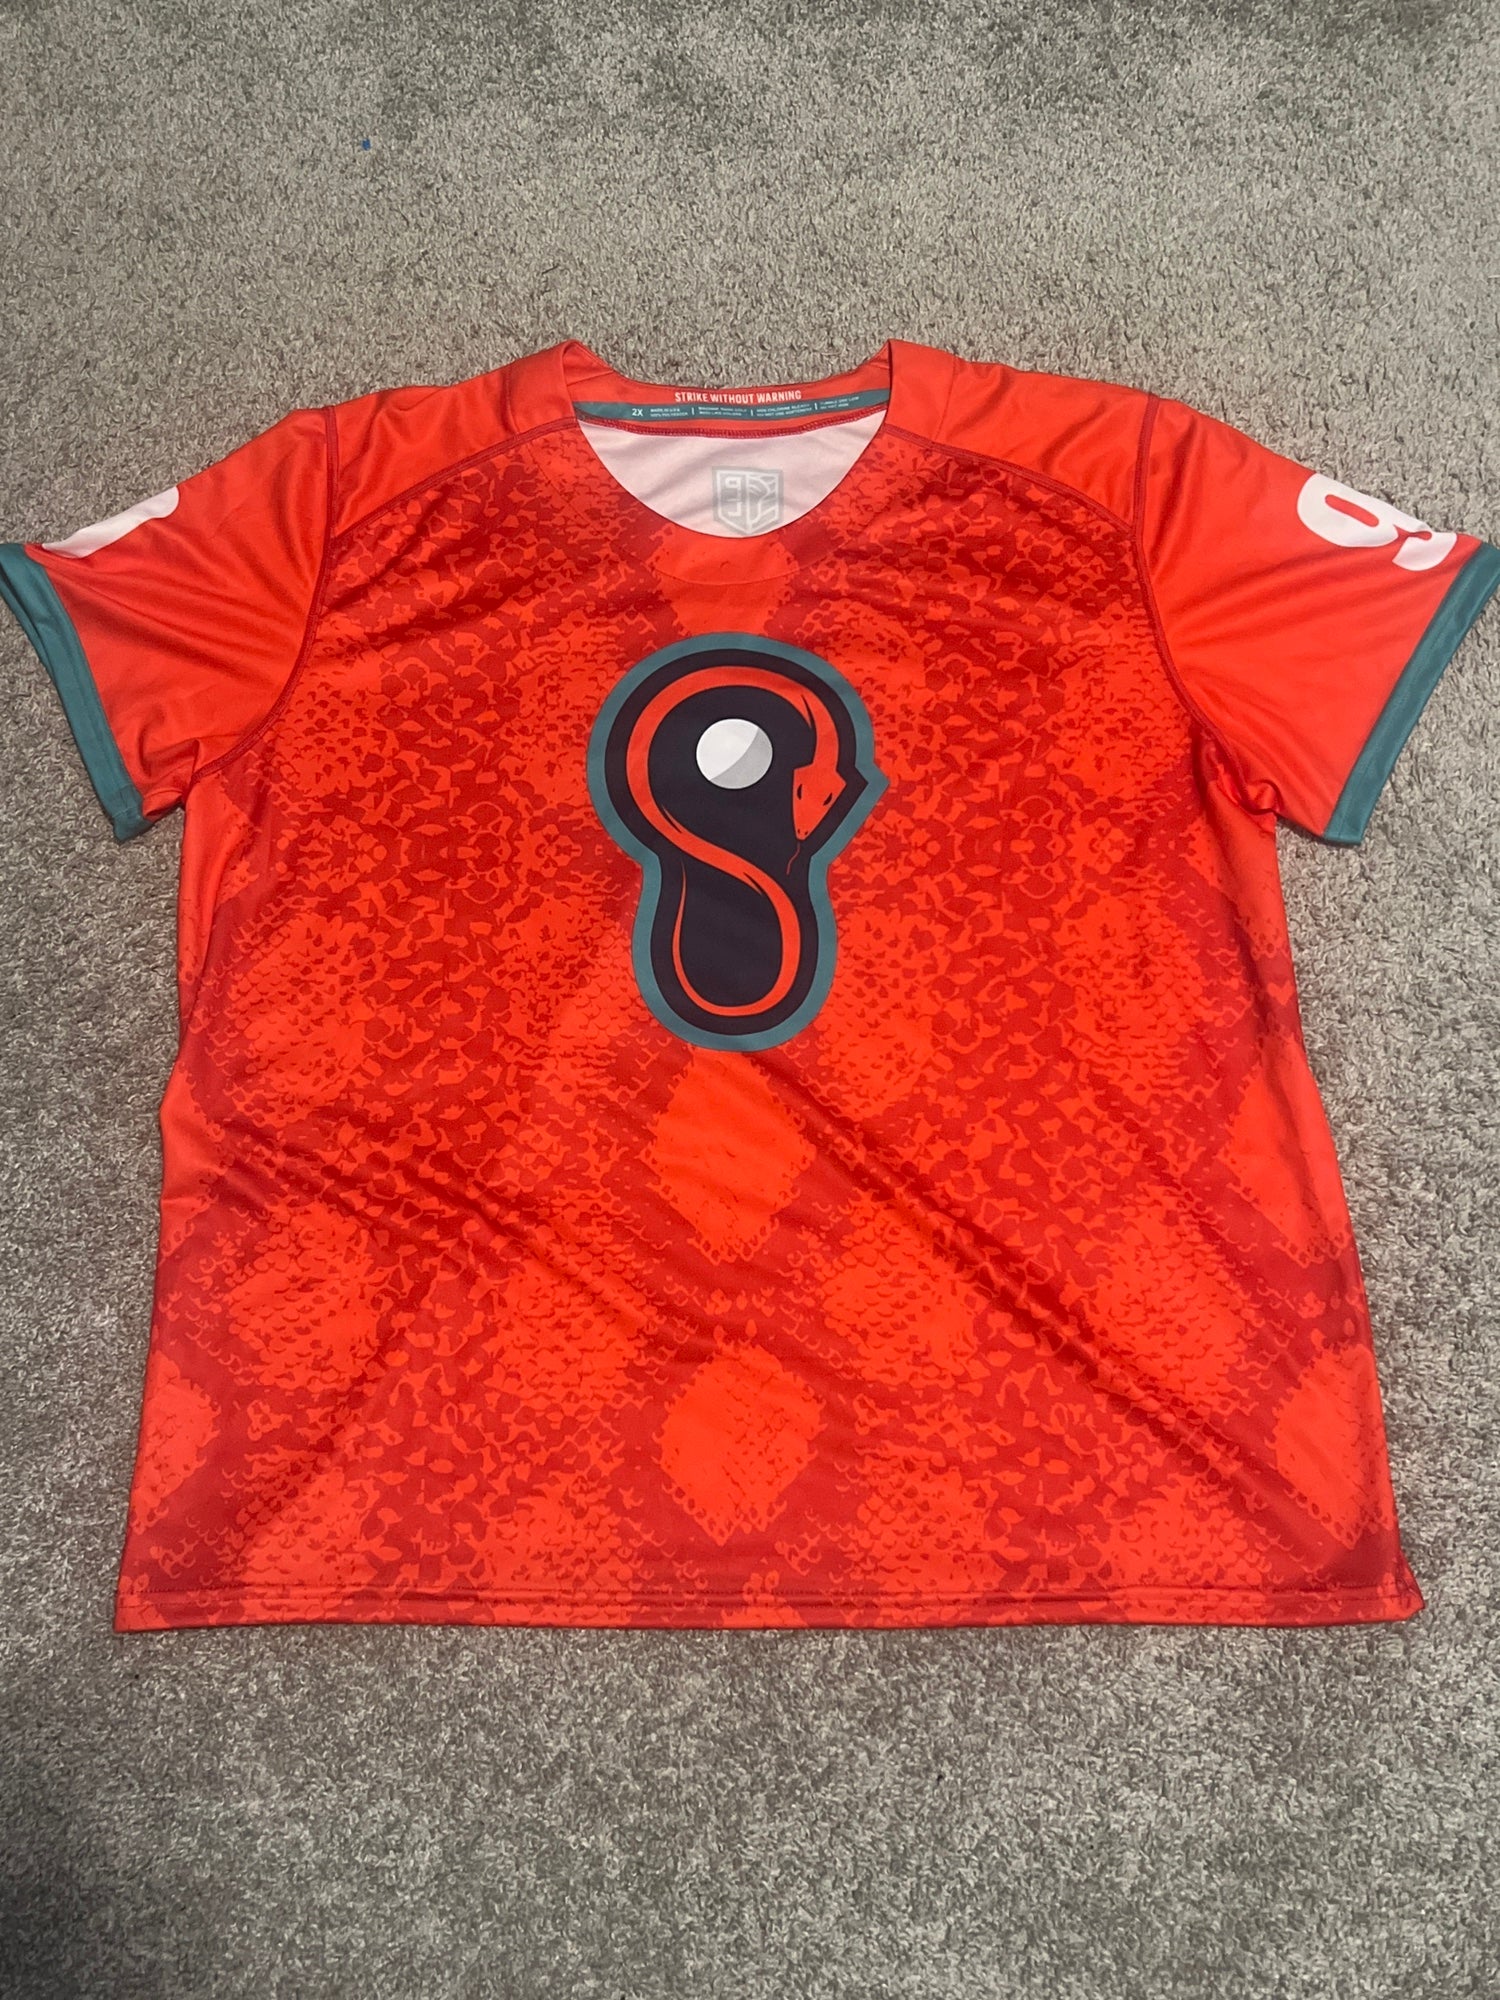 Adidas Whipsnakes Rambo 2021 Replica Jersey (Home) - S